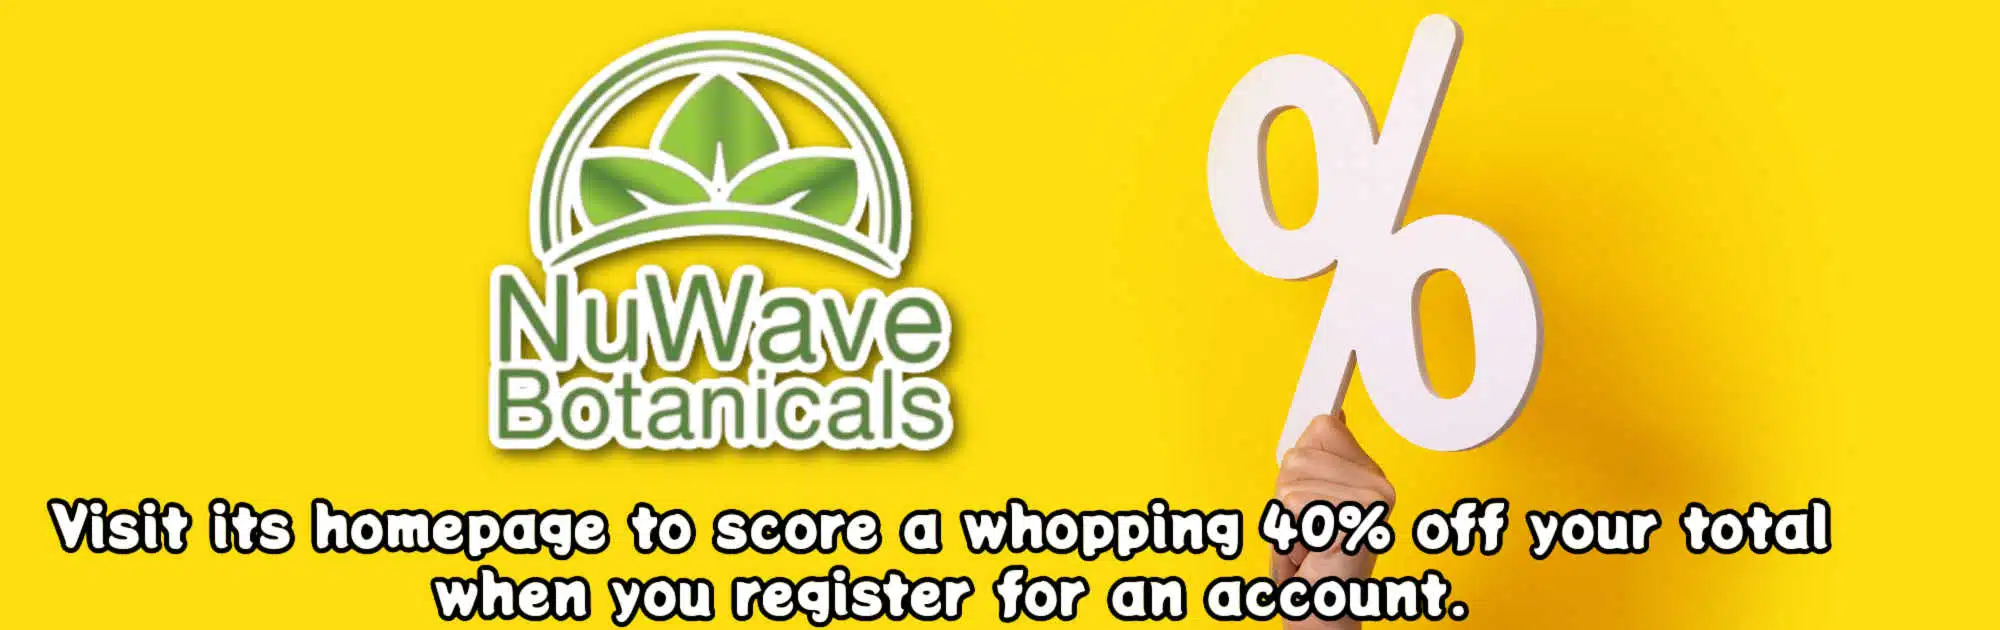 nuwave botanicals discount promo for creating an account